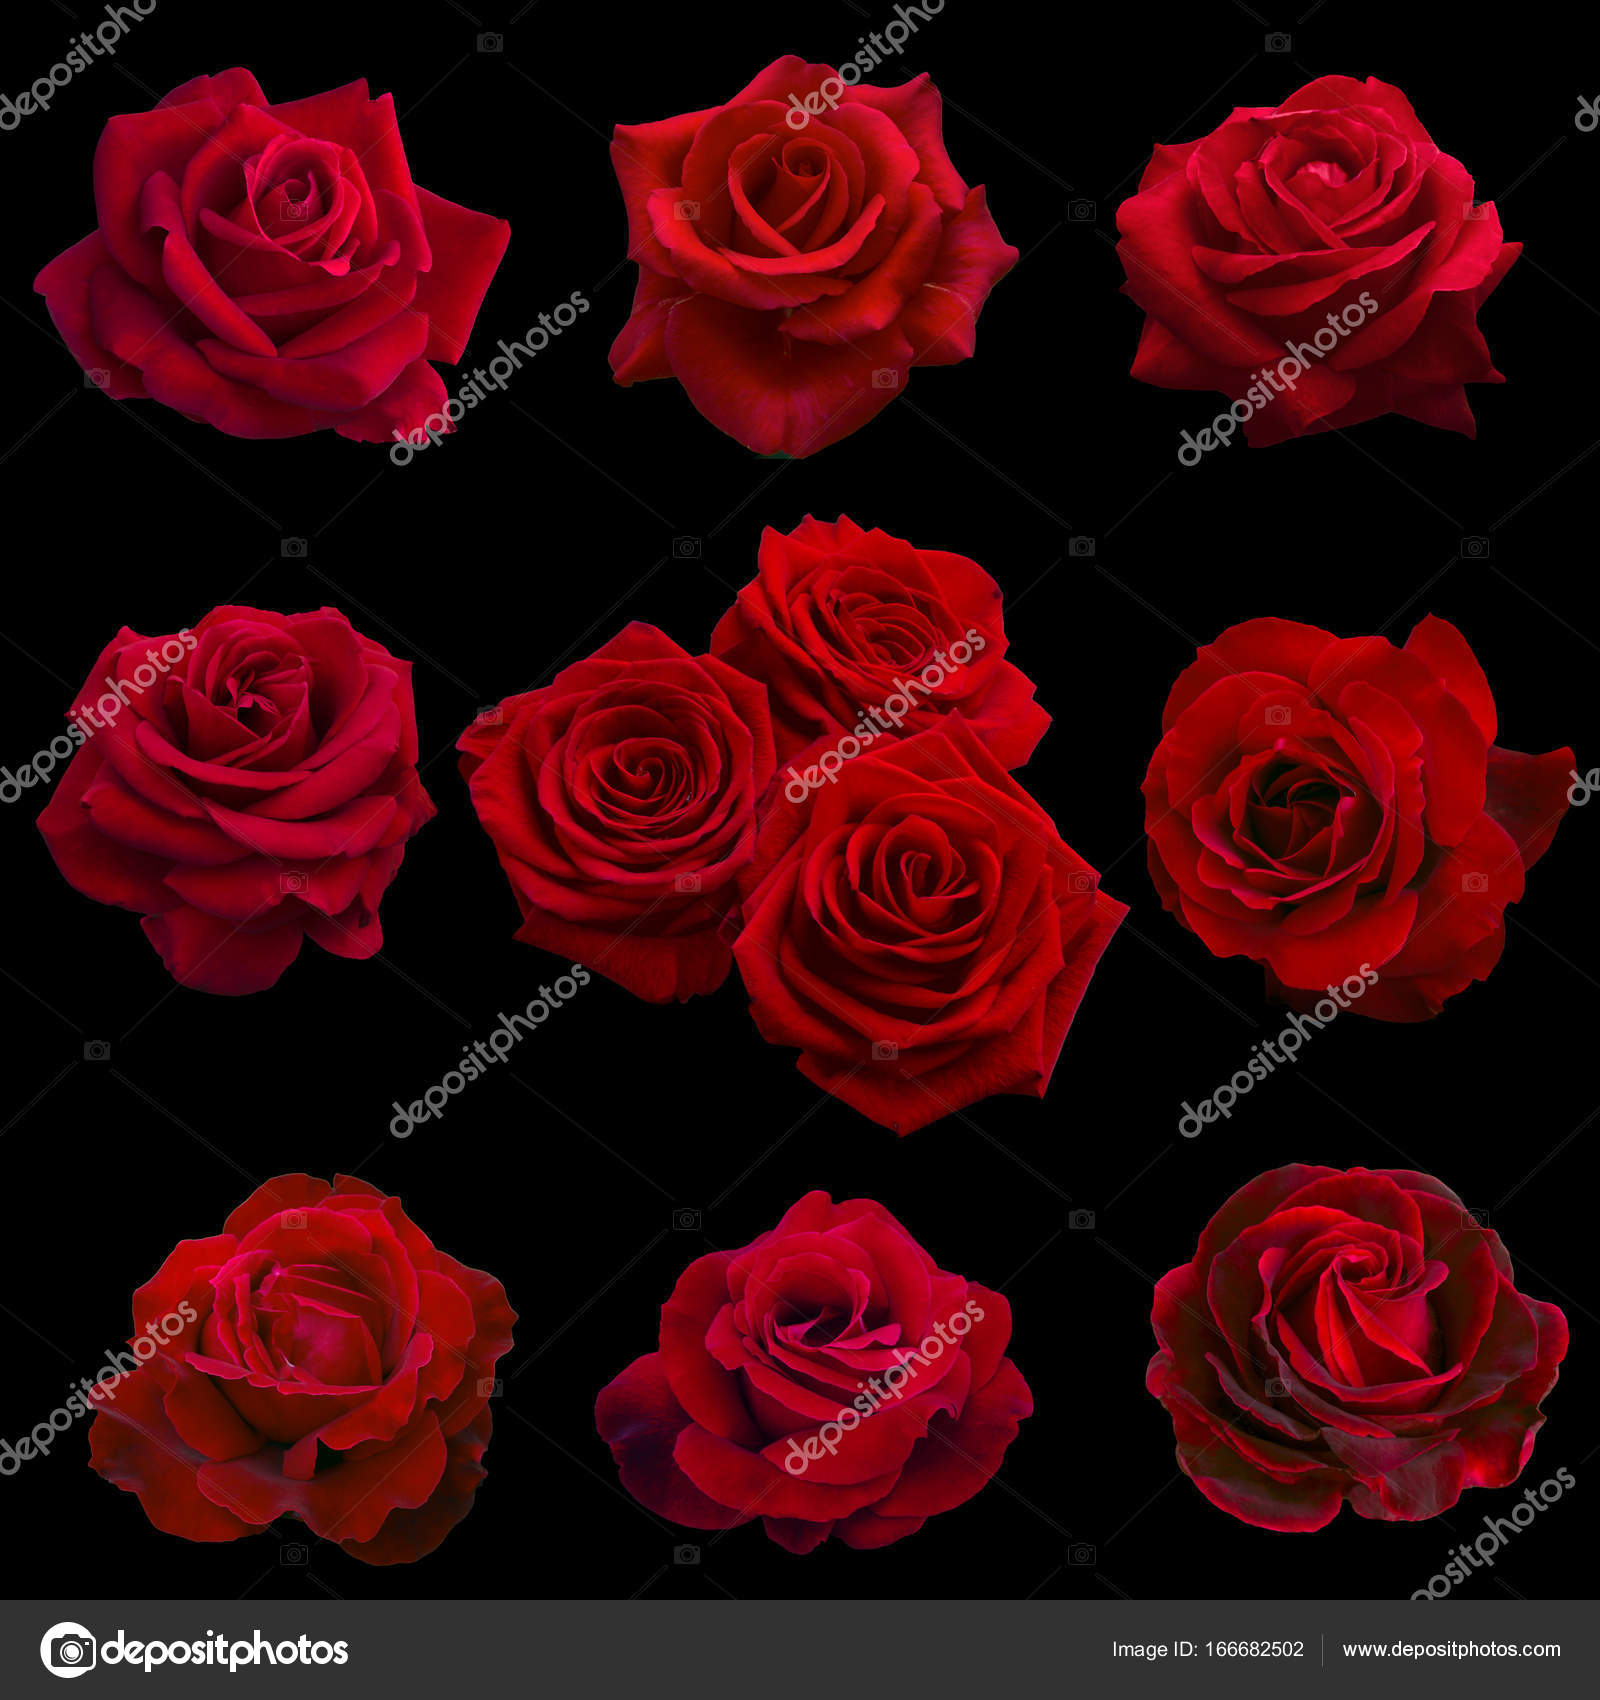 collage of red roses — Stock Photo © Likka #166682502